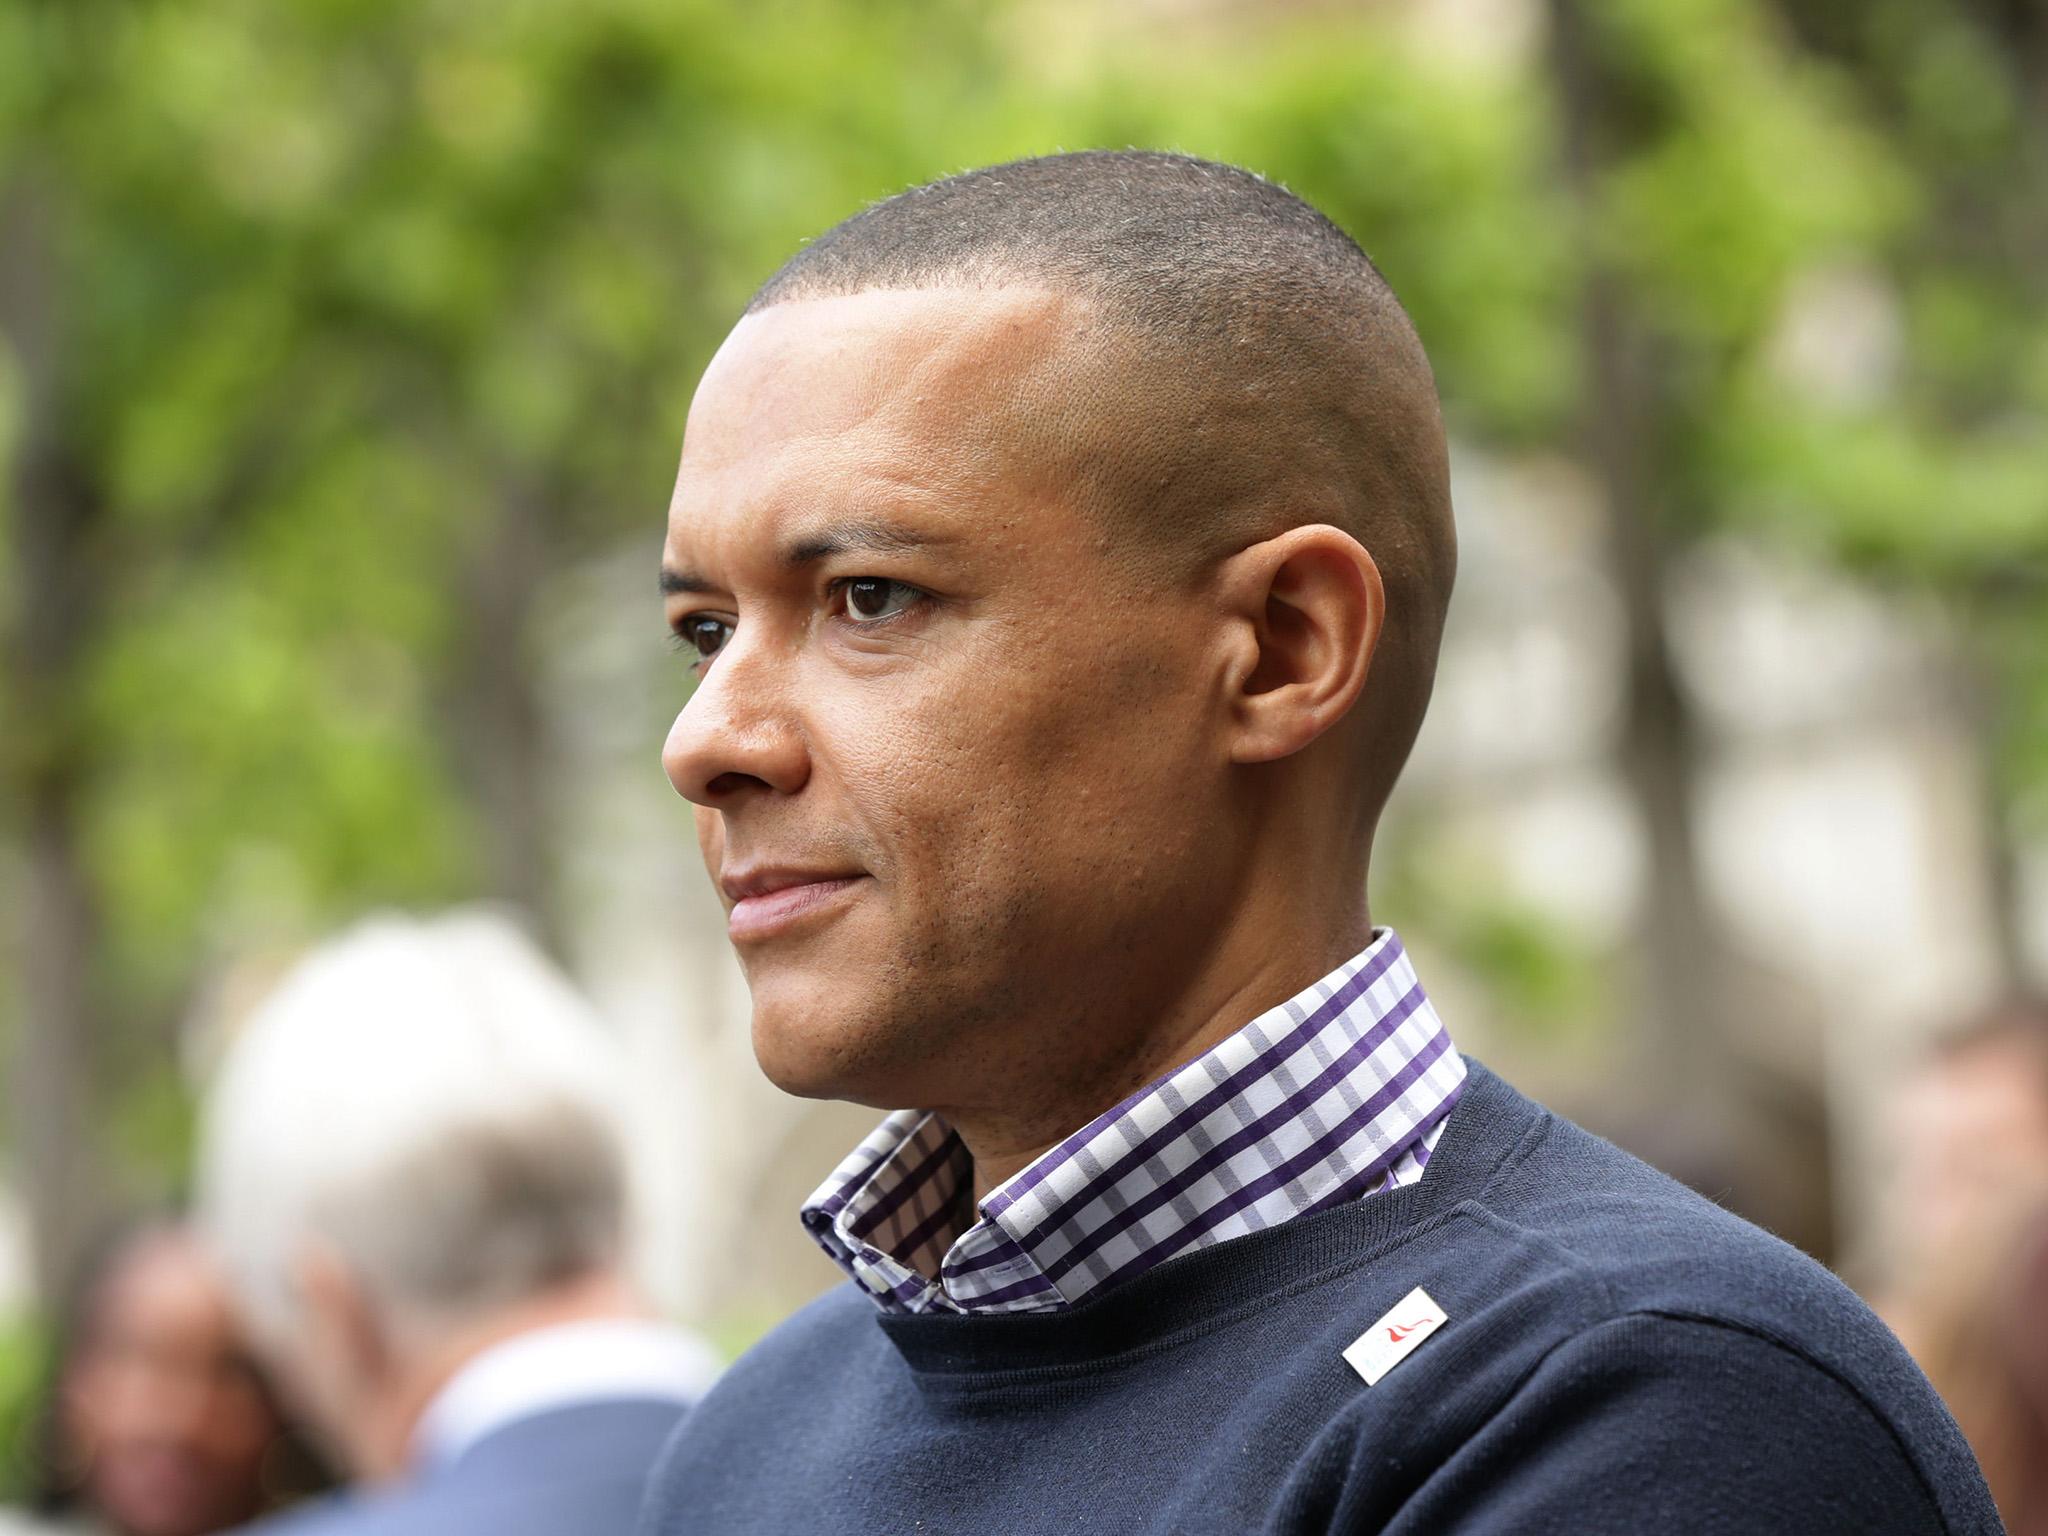 Labour MP Clive Lewis has been cleared of sexual harassment claims